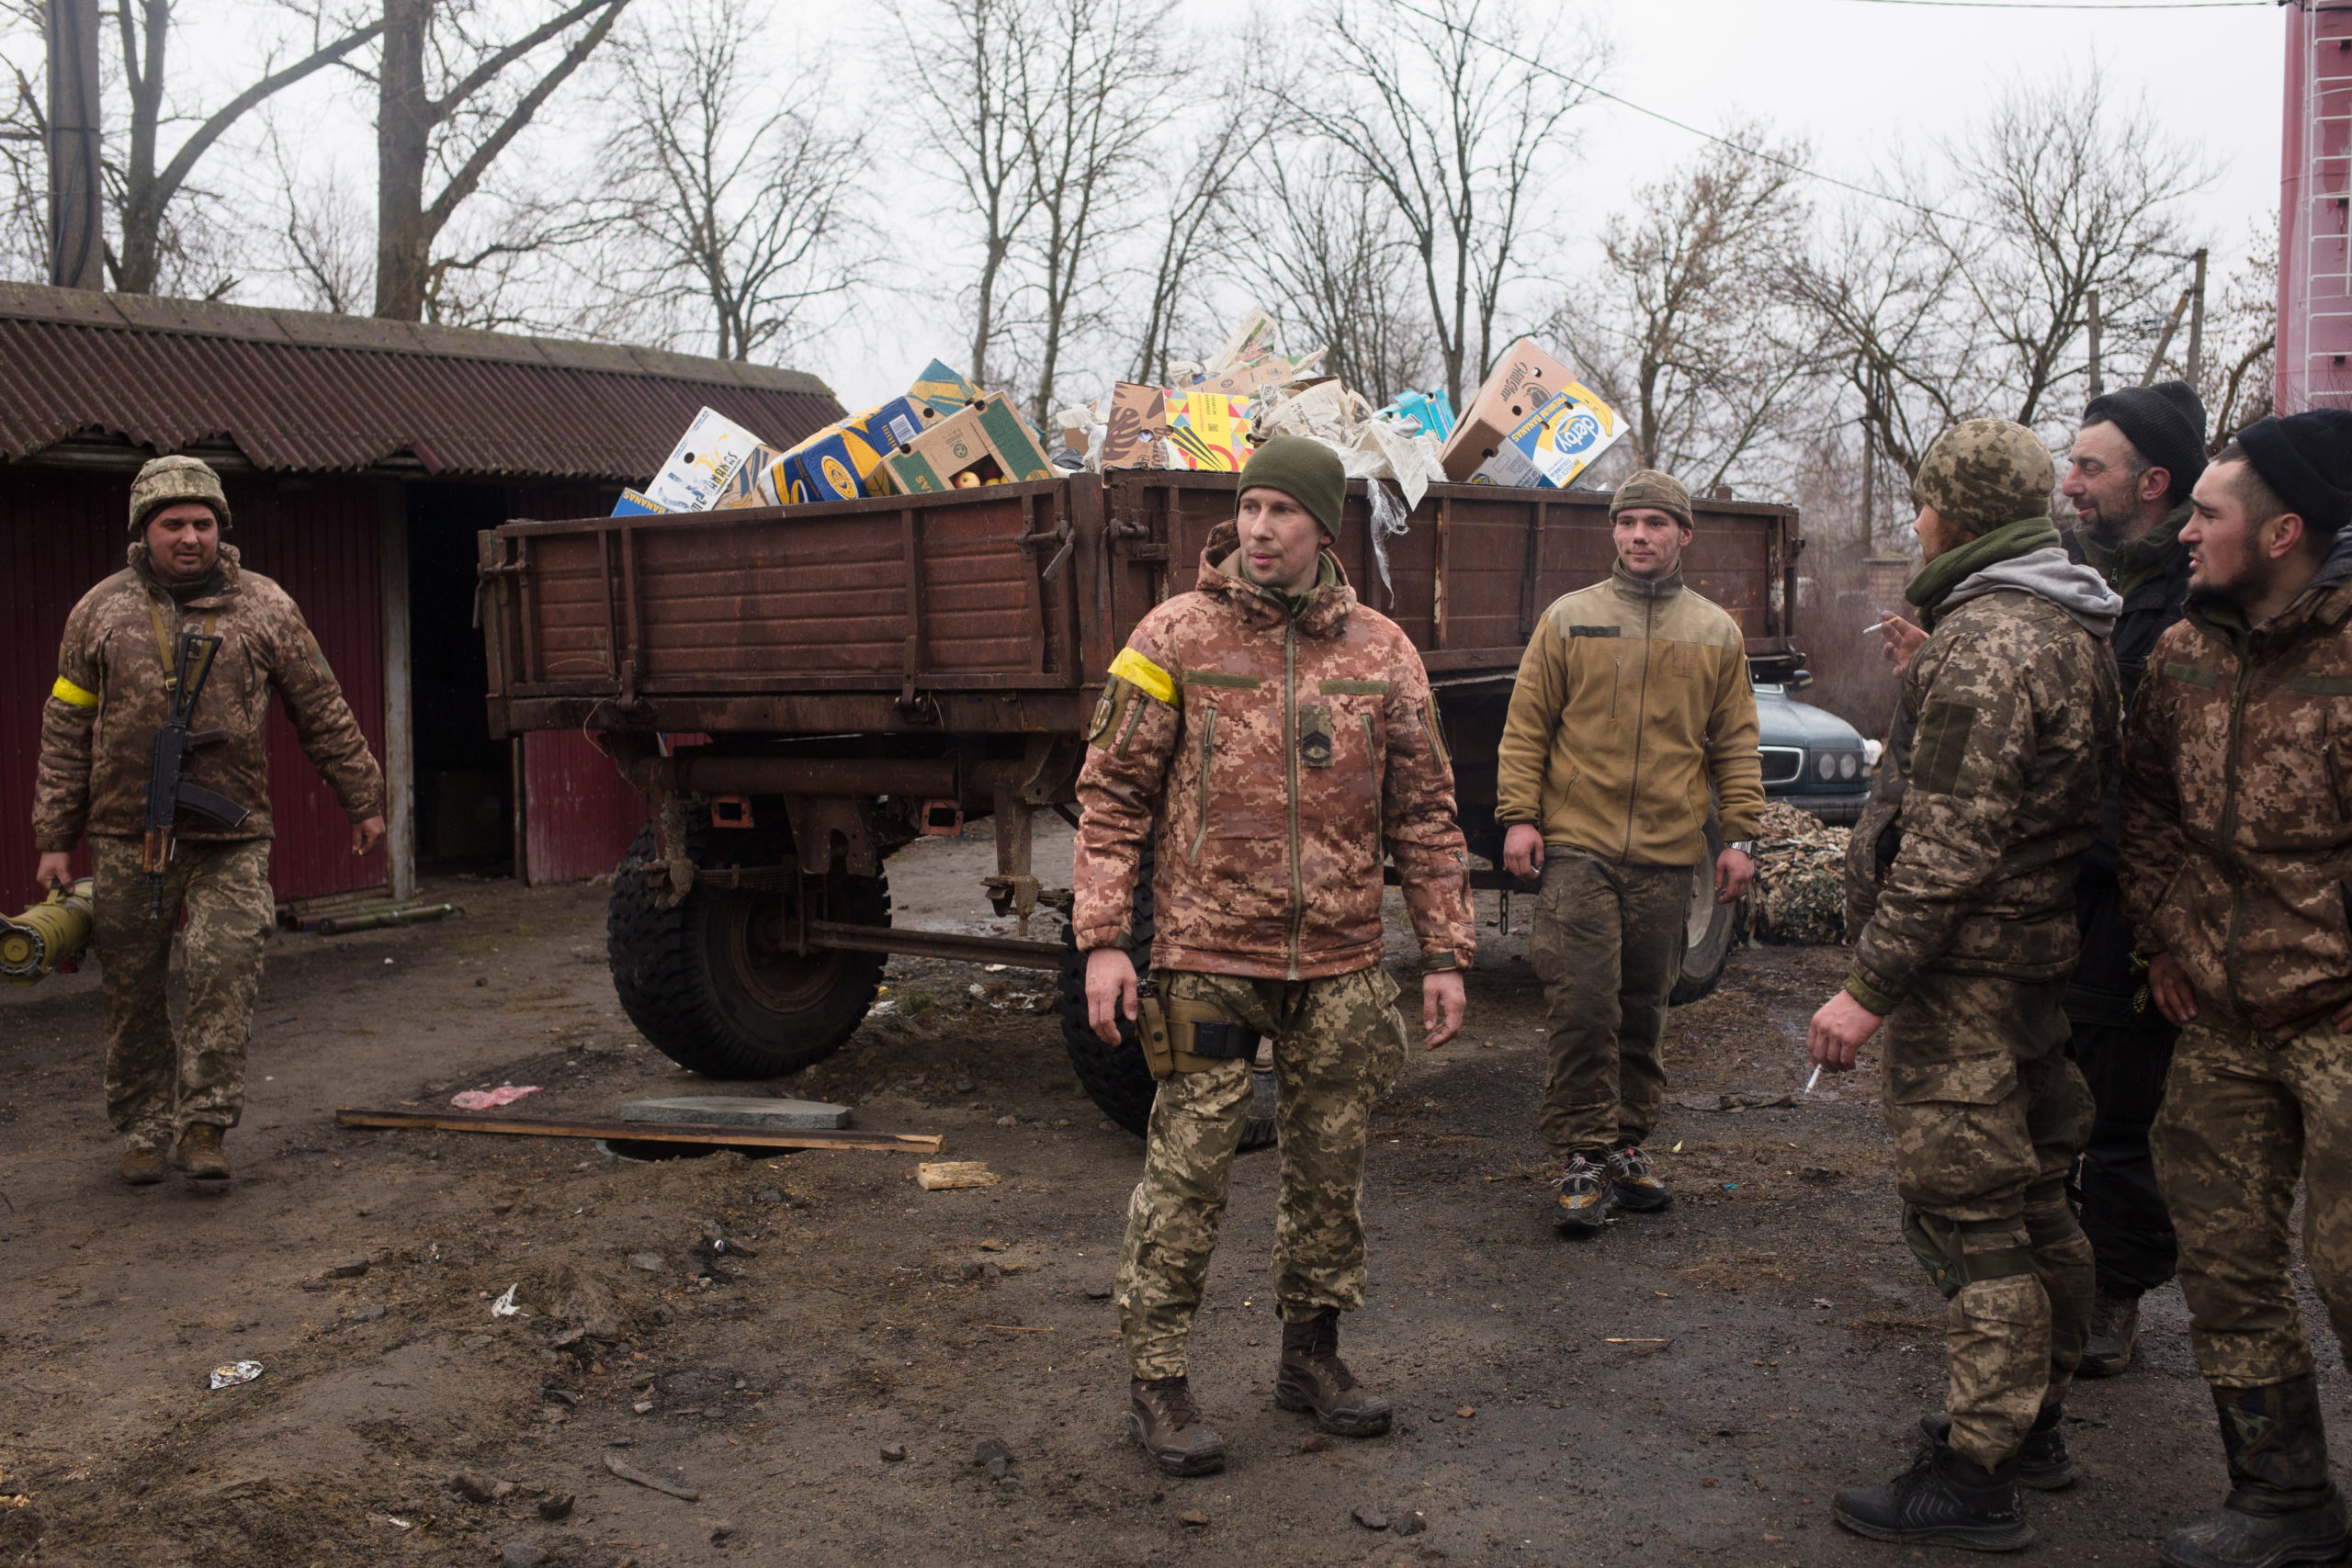 SYTNIAKY, UKRAINE - MARCH 03: Ukrainian servicemen stand near their military redoubt on March 3, 2022 in Sytniaky, Ukraine, west of the capital. Russia continues its assault on Ukraine's major cities, including the capital Kyiv, a week after launching a large-scale invasion of the country. (Photo by Anastasia Vlasova/Getty Images)